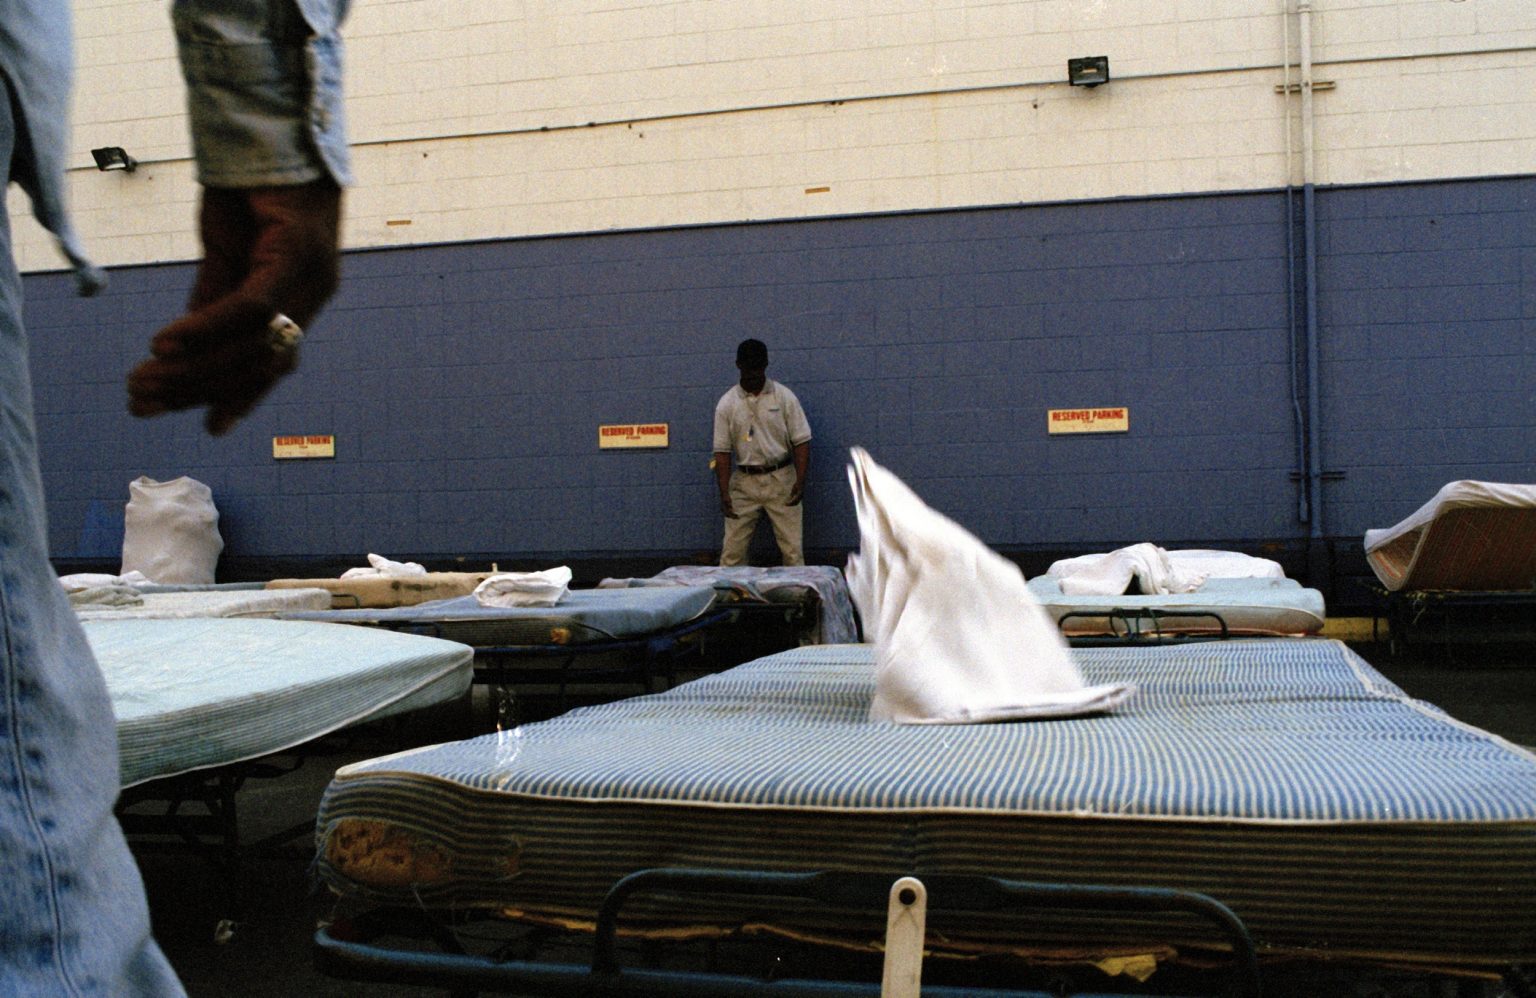 Los Angeles 2004 - Skid Row  - The Midnight Mission - Preparing beds for the Safe Sleep Project 
><
Los Angeles 2004 - Skid Row  - The Midnight Mission - Preparazione dei letti per il Progetto Safe Sleep *** Local Caption *** 00216503